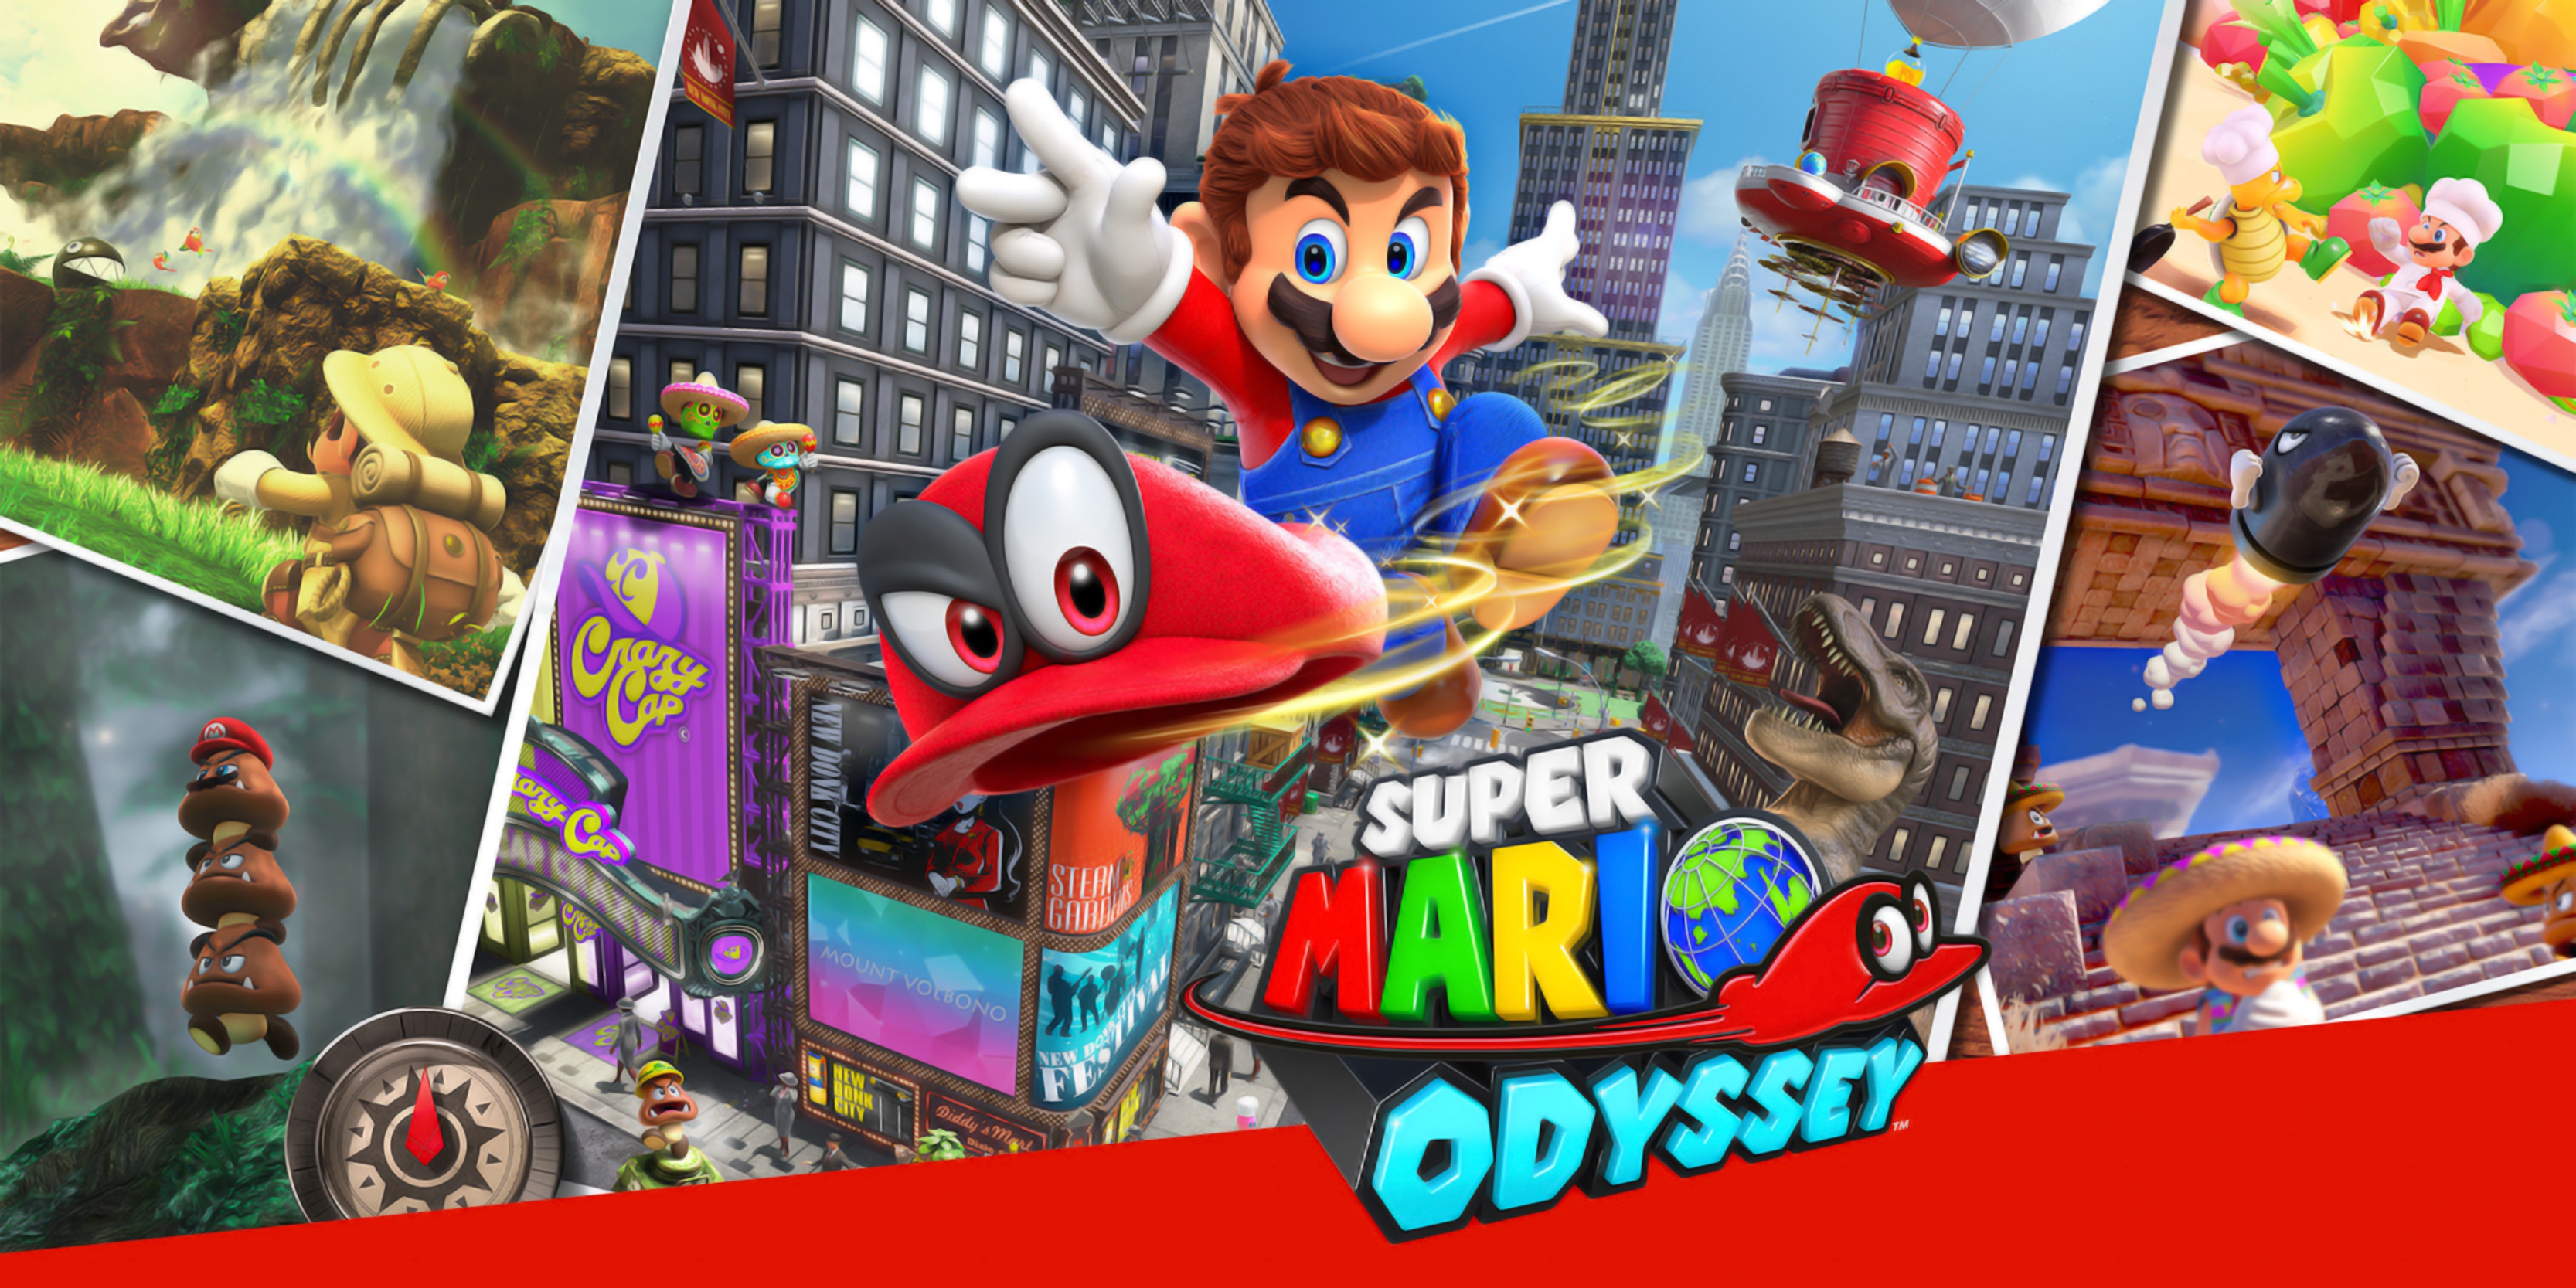 10 Most Popular Super Mario Odyssey Wallpaper Hd FULL HD 1080p For PC Background